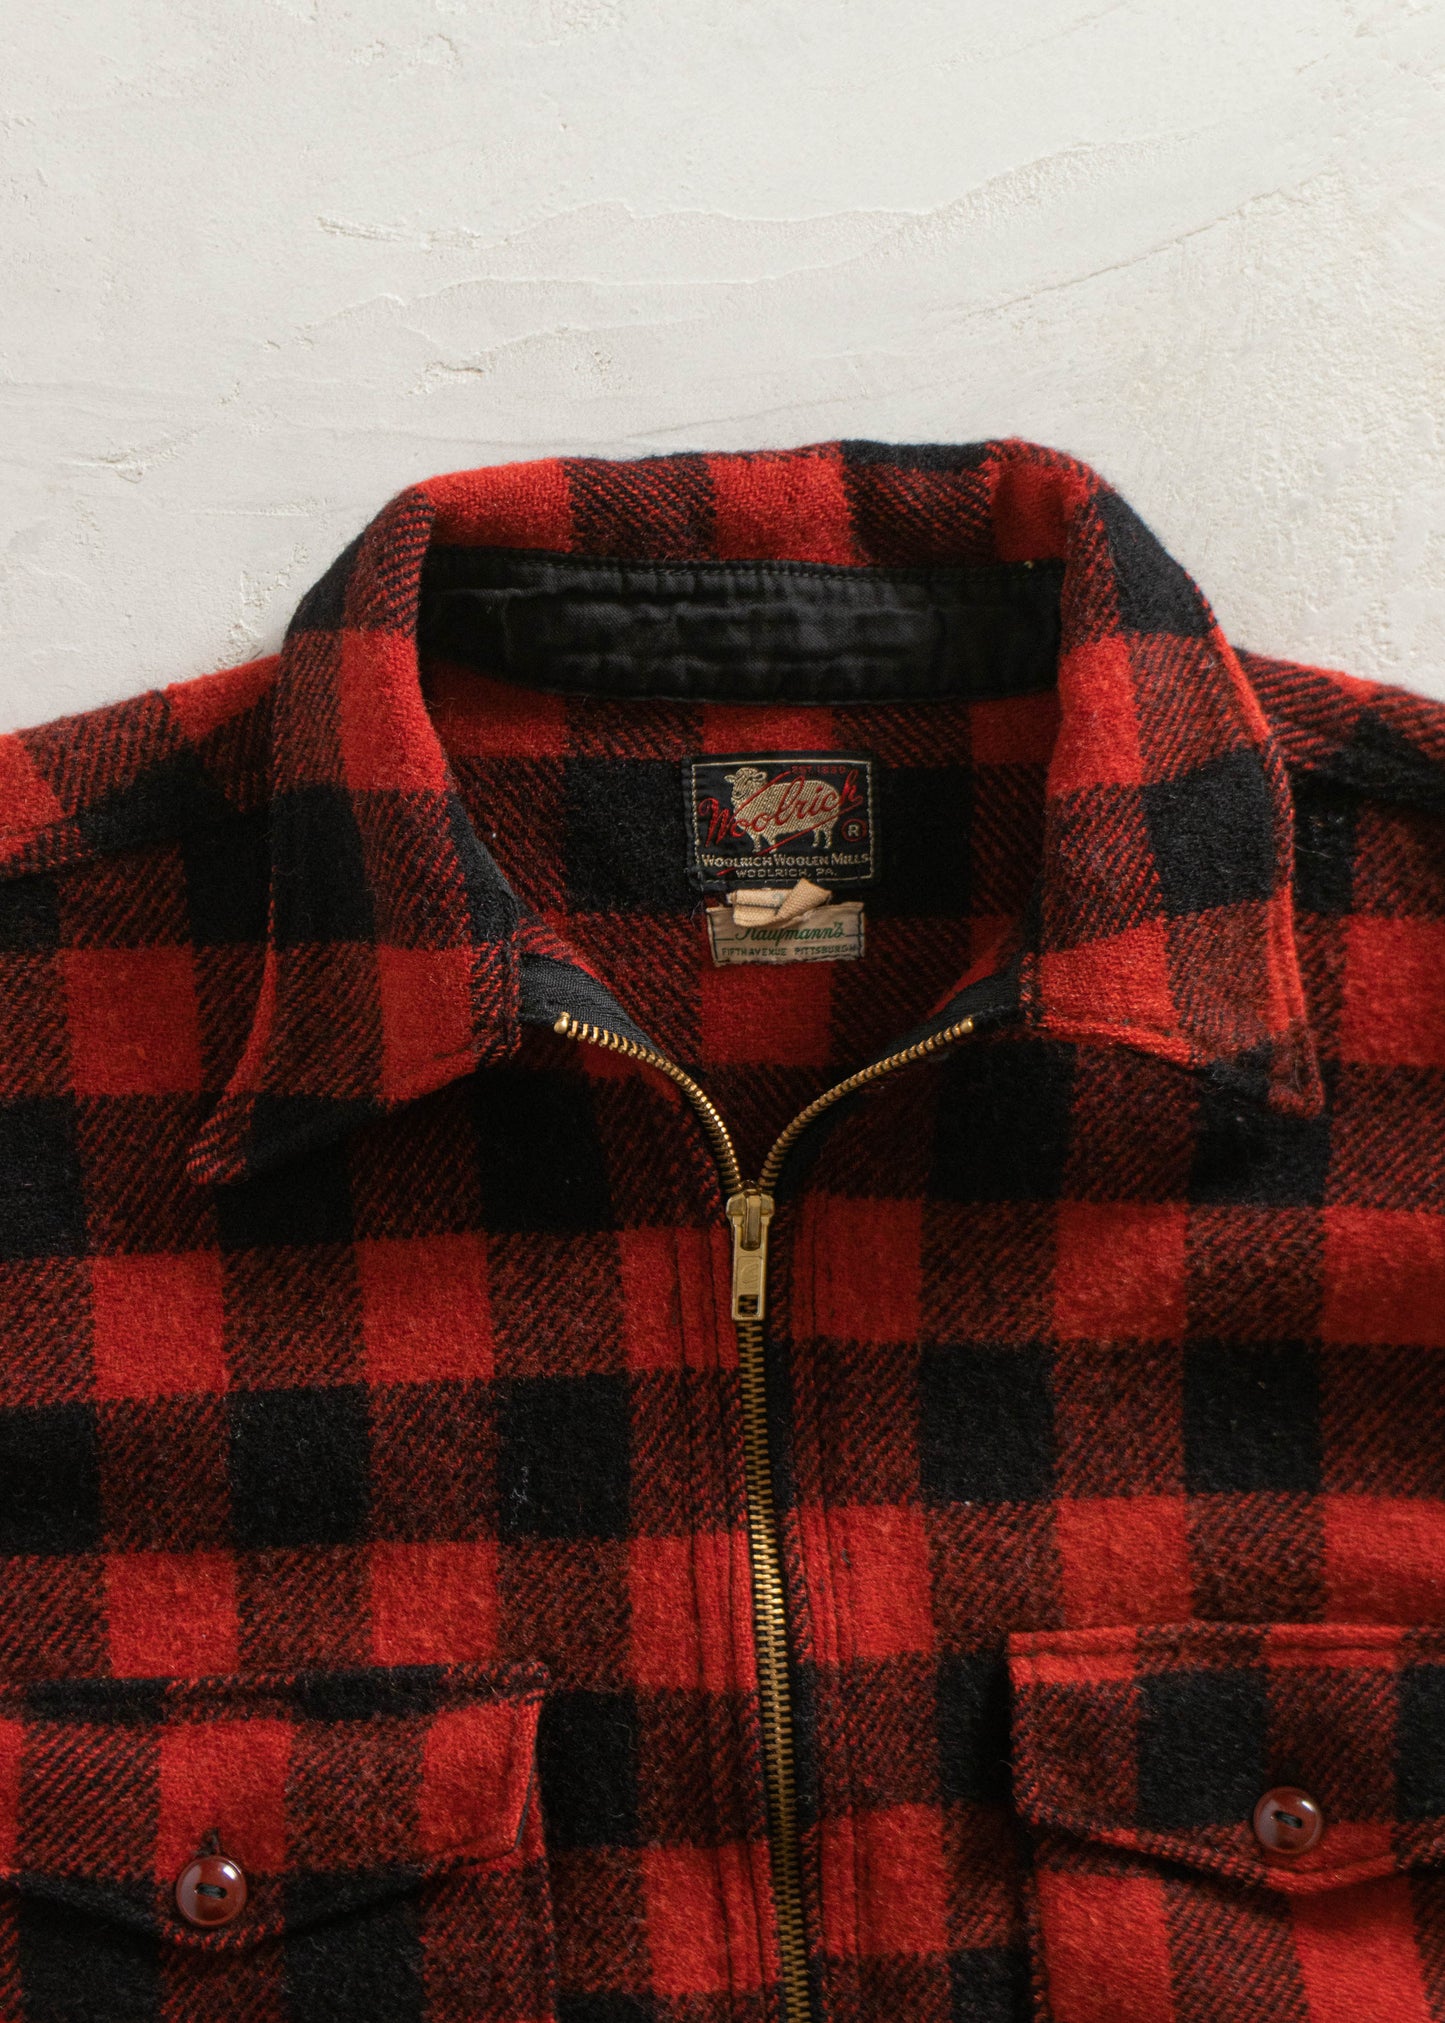 Vintage 1970s Woolrich Flannel Button Up Shirt Size Size S/M